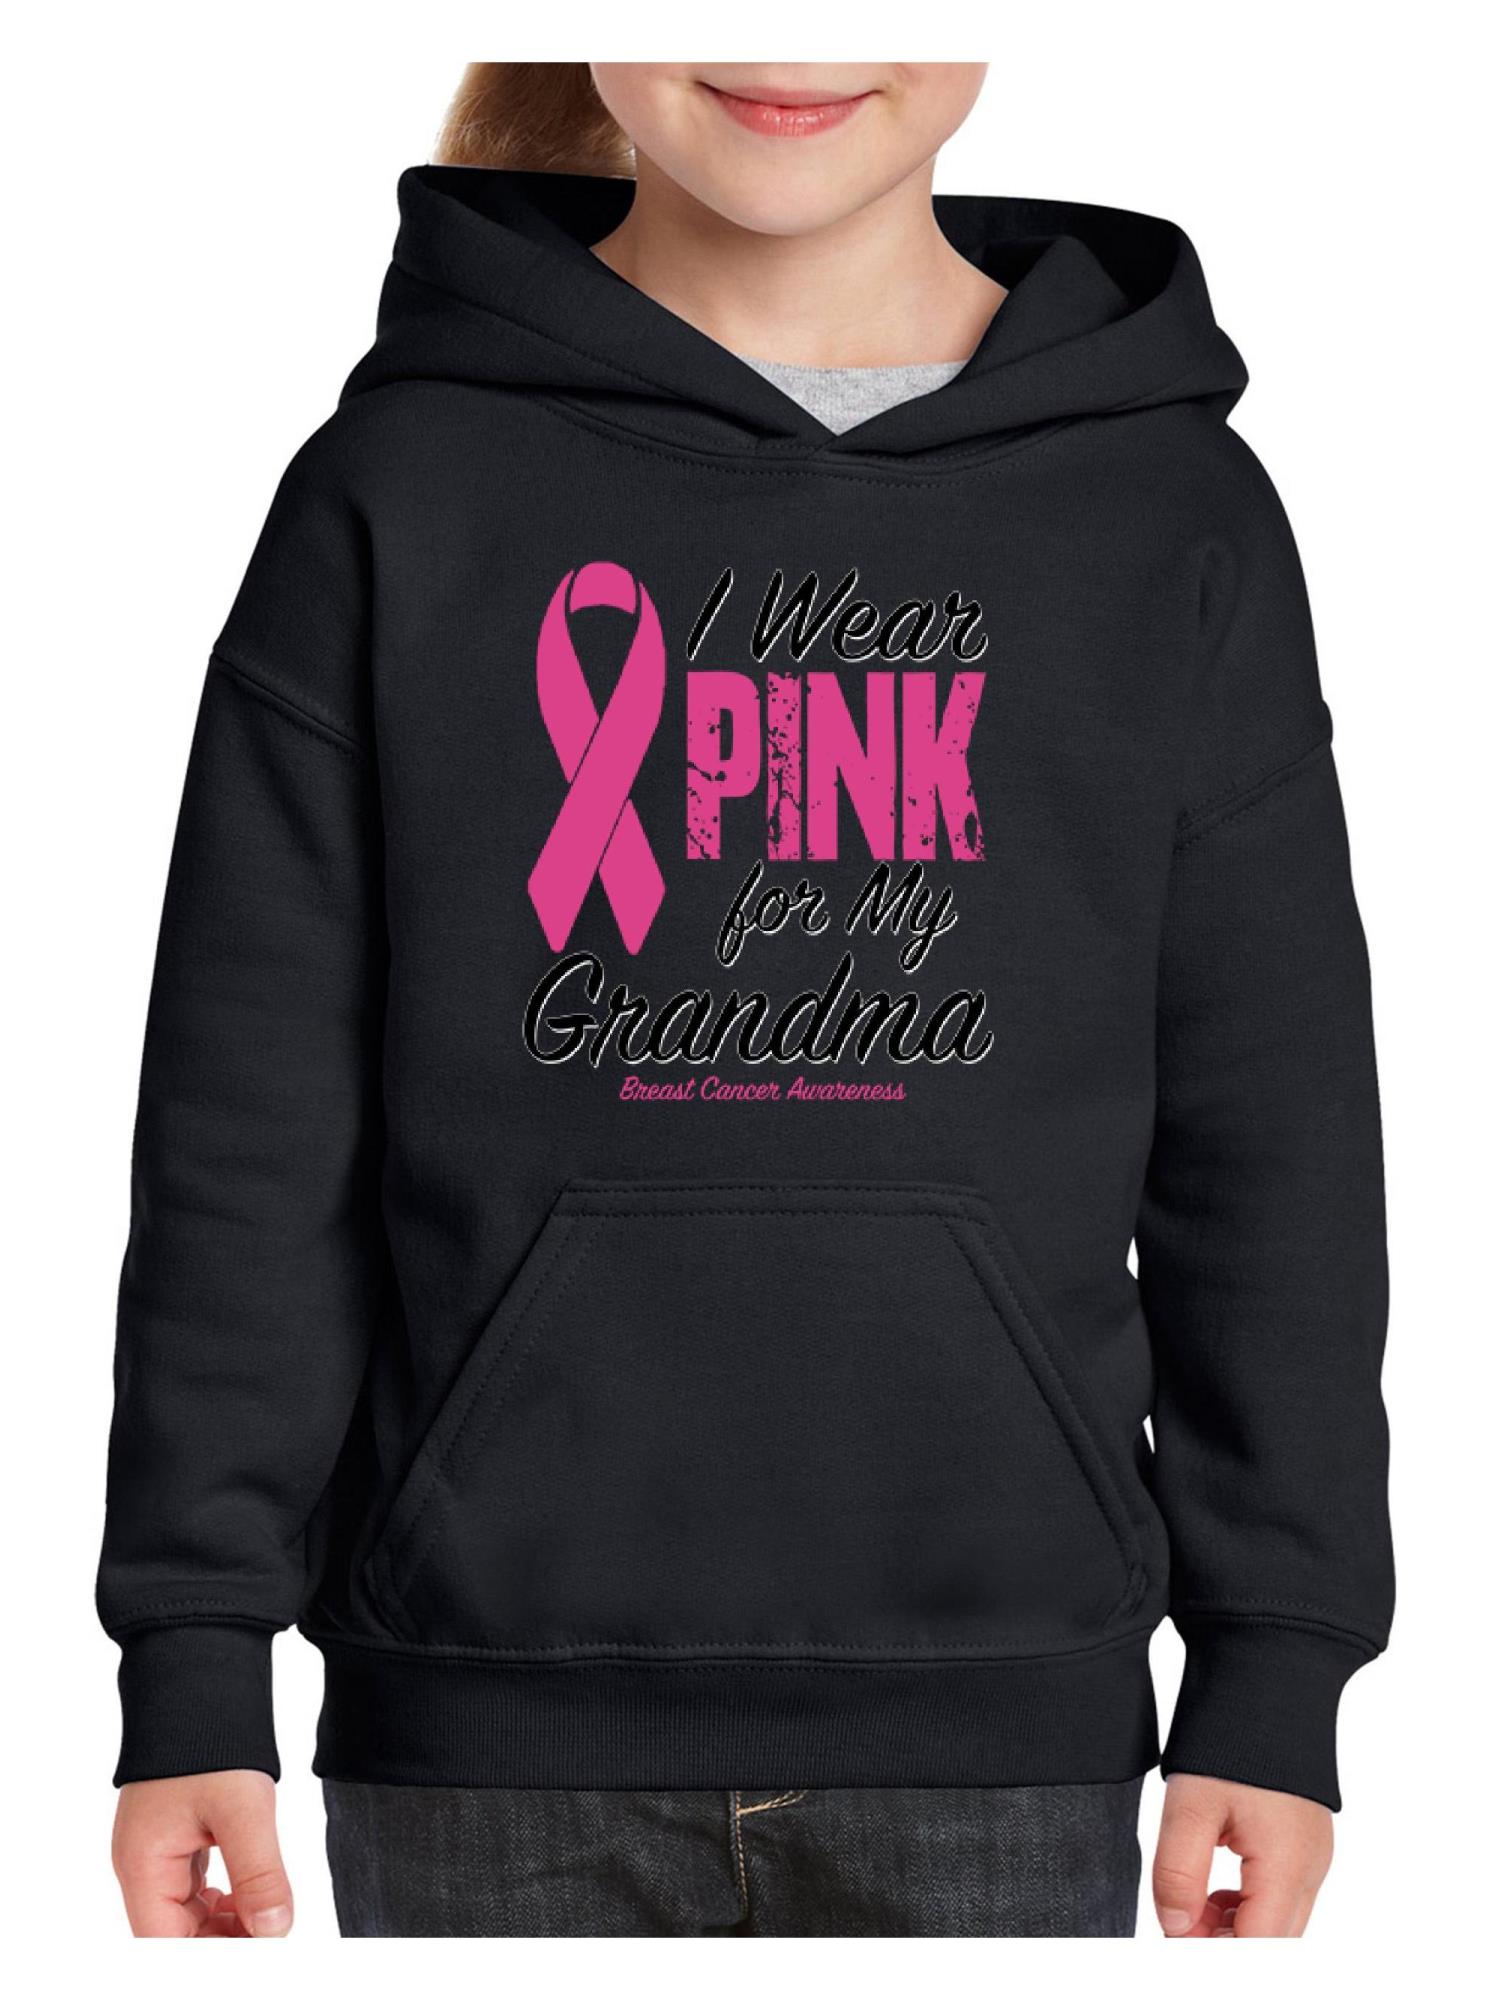 Cancer Awareness I Wear Pink for My Grandma Unisex Hoodie For Girls and Boys Youth Sweatshirt